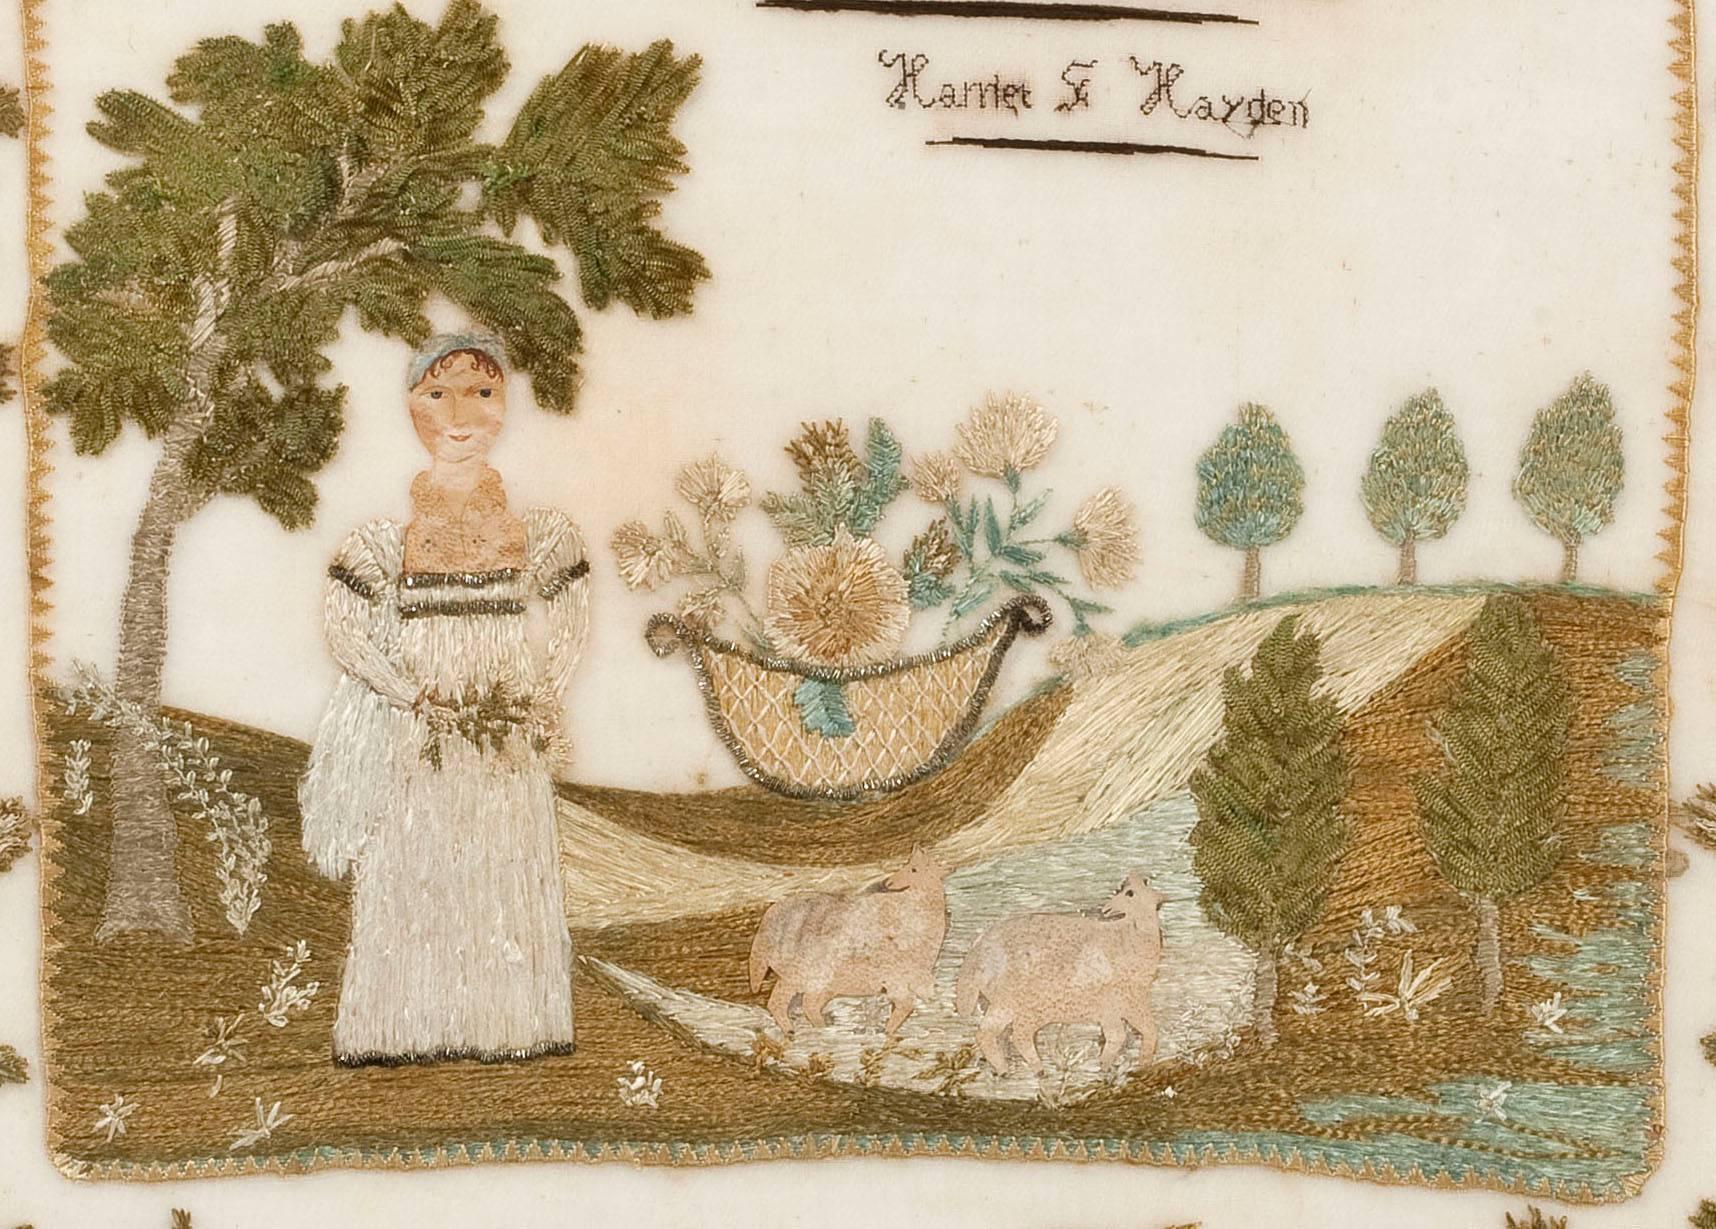 An outstanding sampler with enormous visual appeal, this is one of several known pieces that form a small, highly significant group considered to rank highly within the finest of New Hampshire folk art.

The samplers were made in the town of